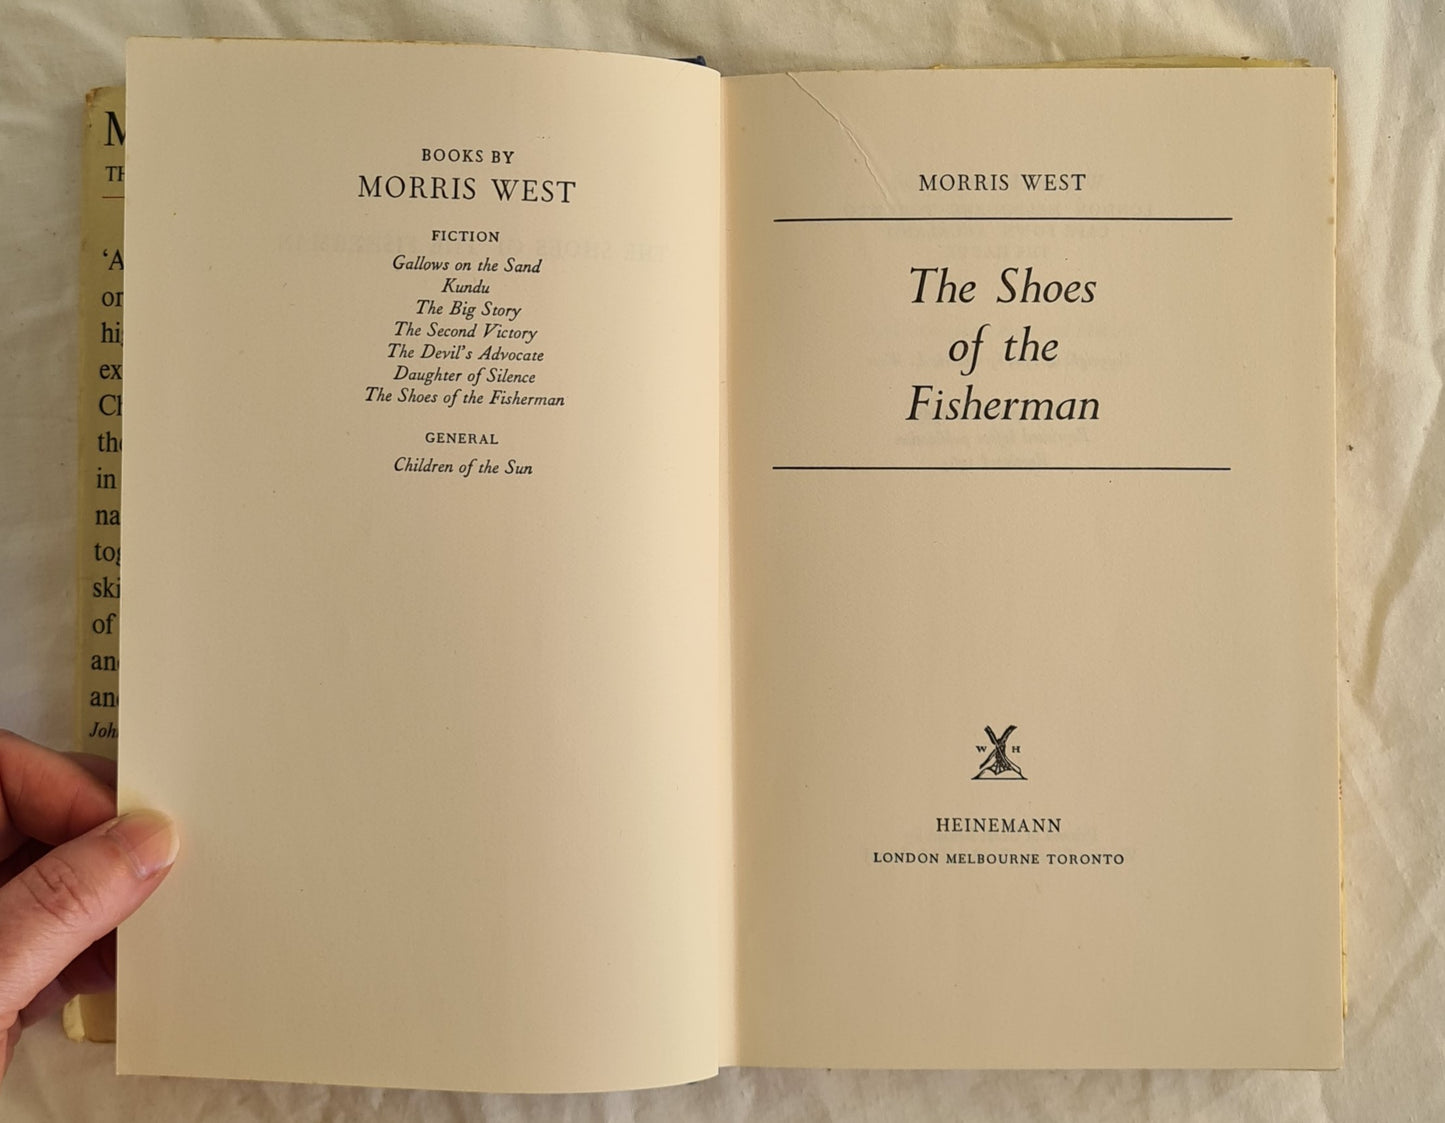 The Shoes of the Fisherman by Morris West